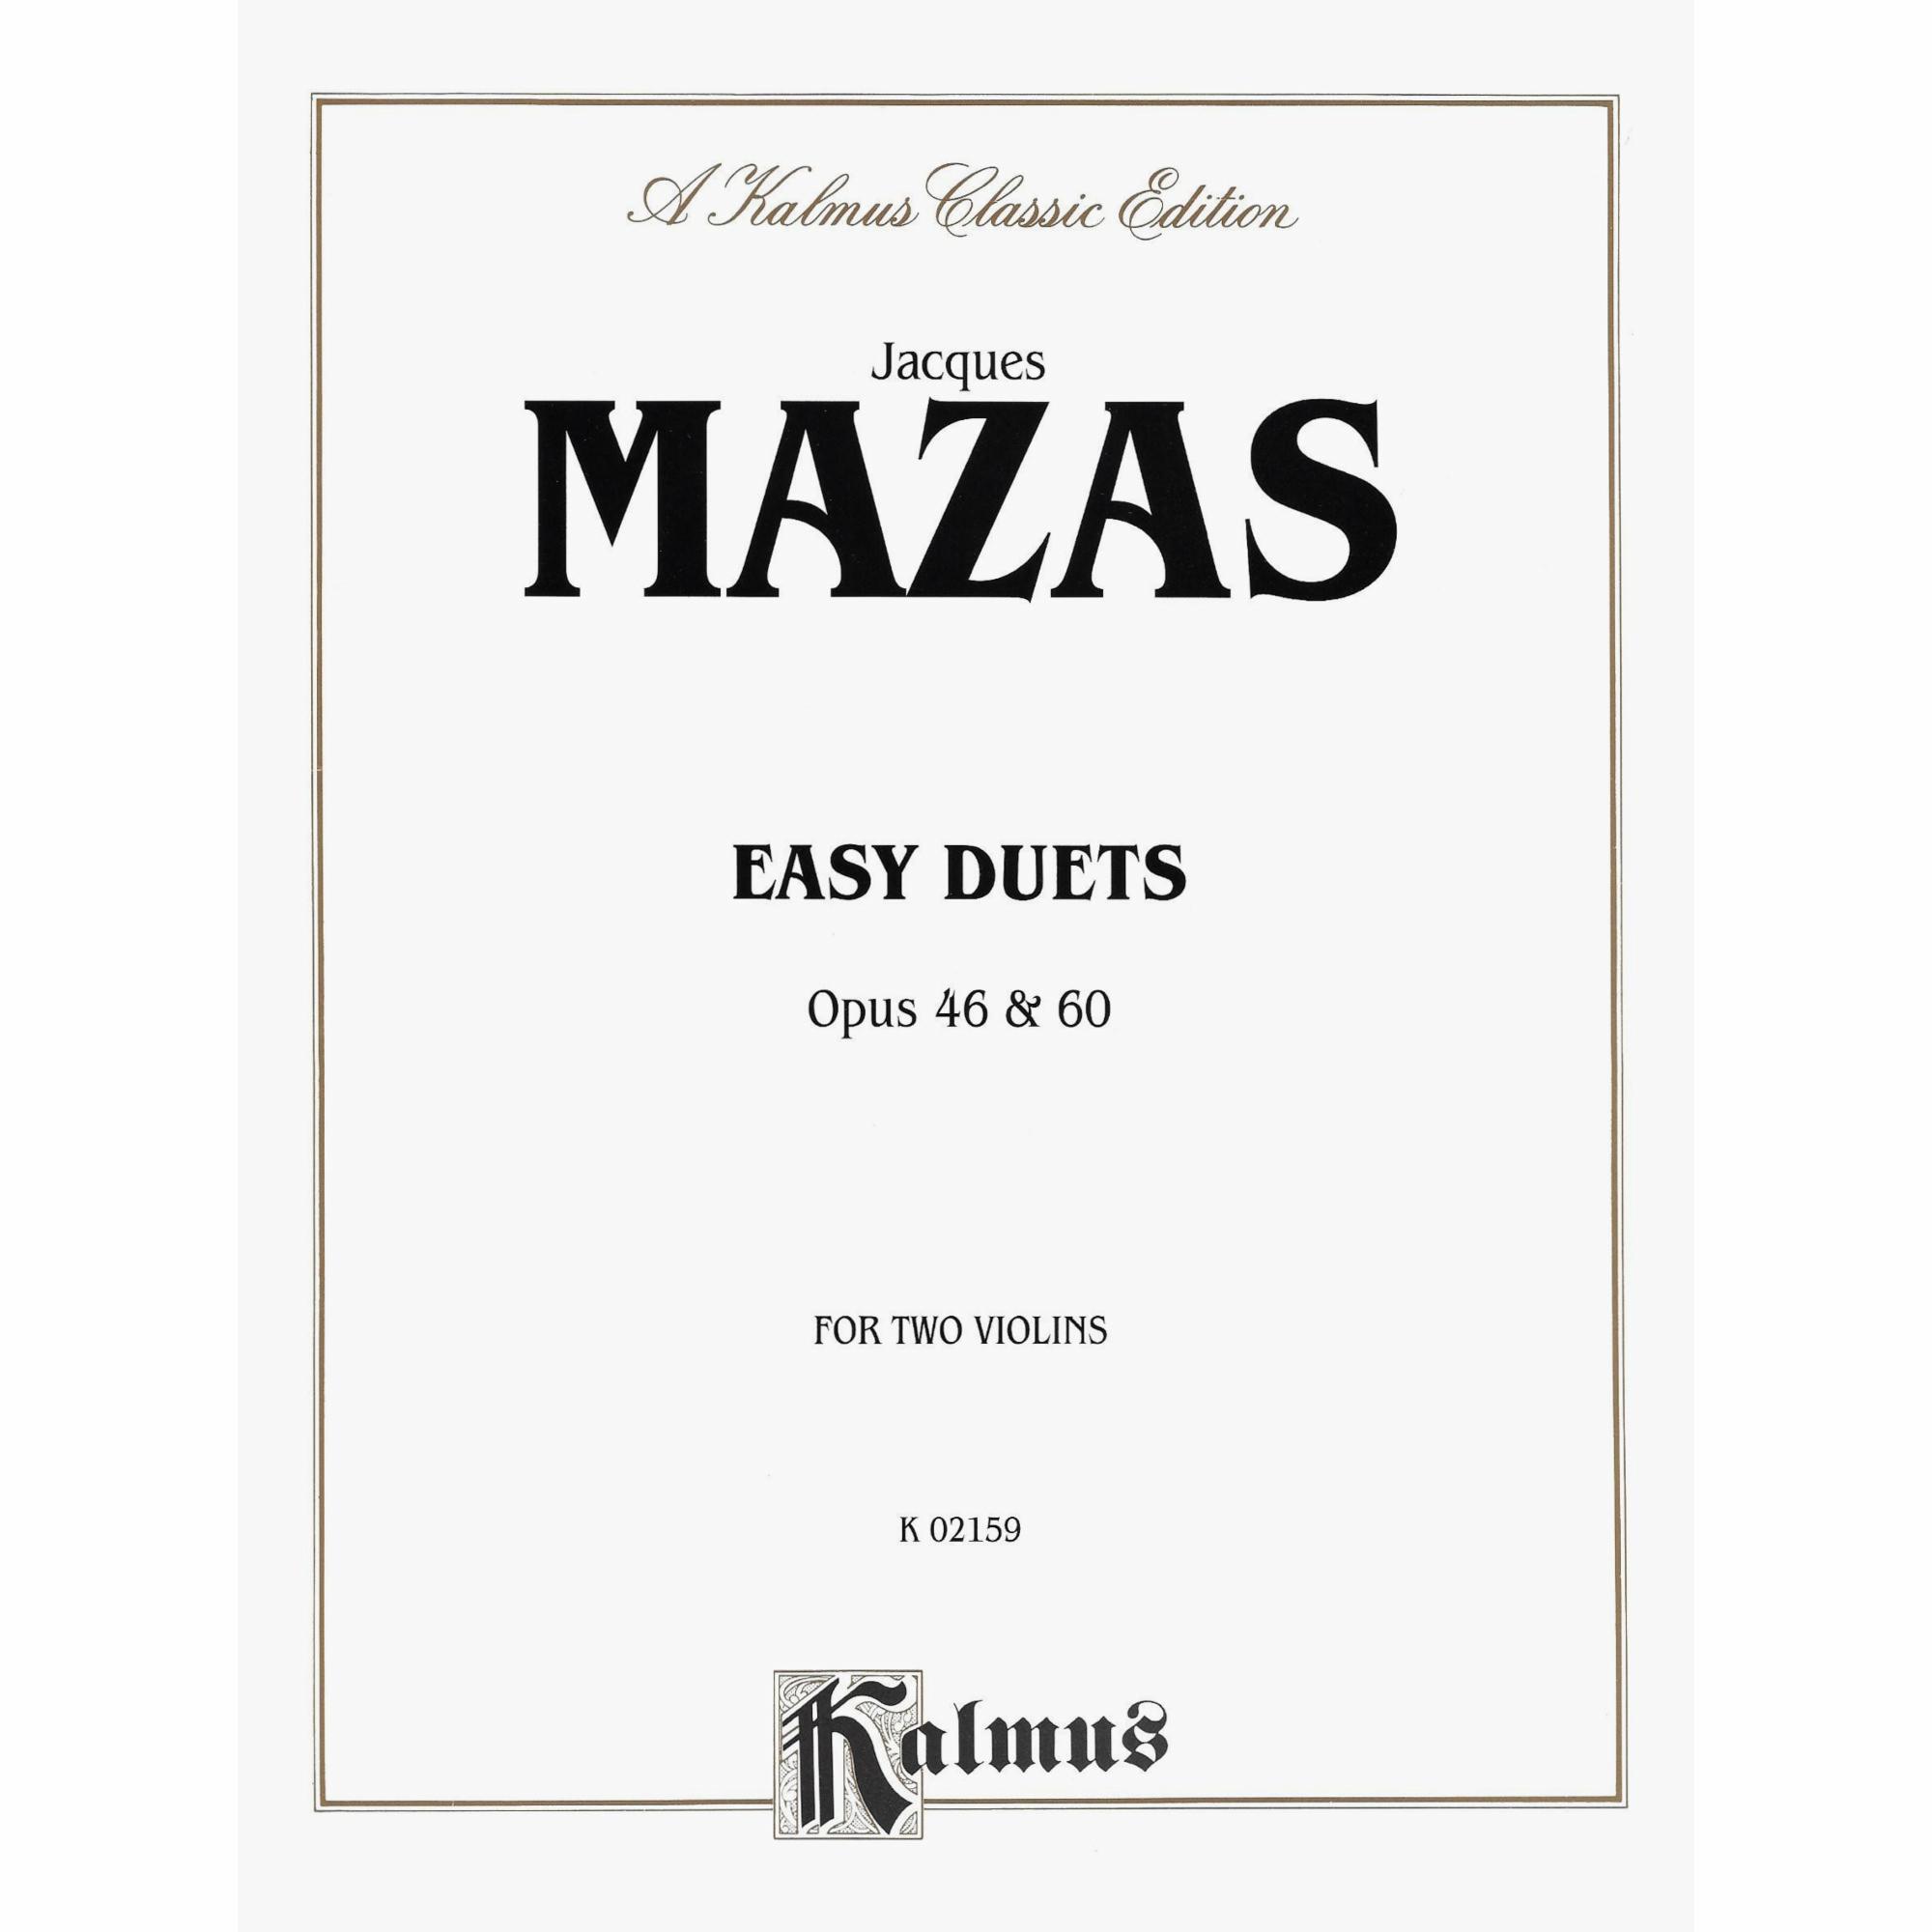 Mazas -- Easy Duets, Op. 46 & 60 for Two Violins